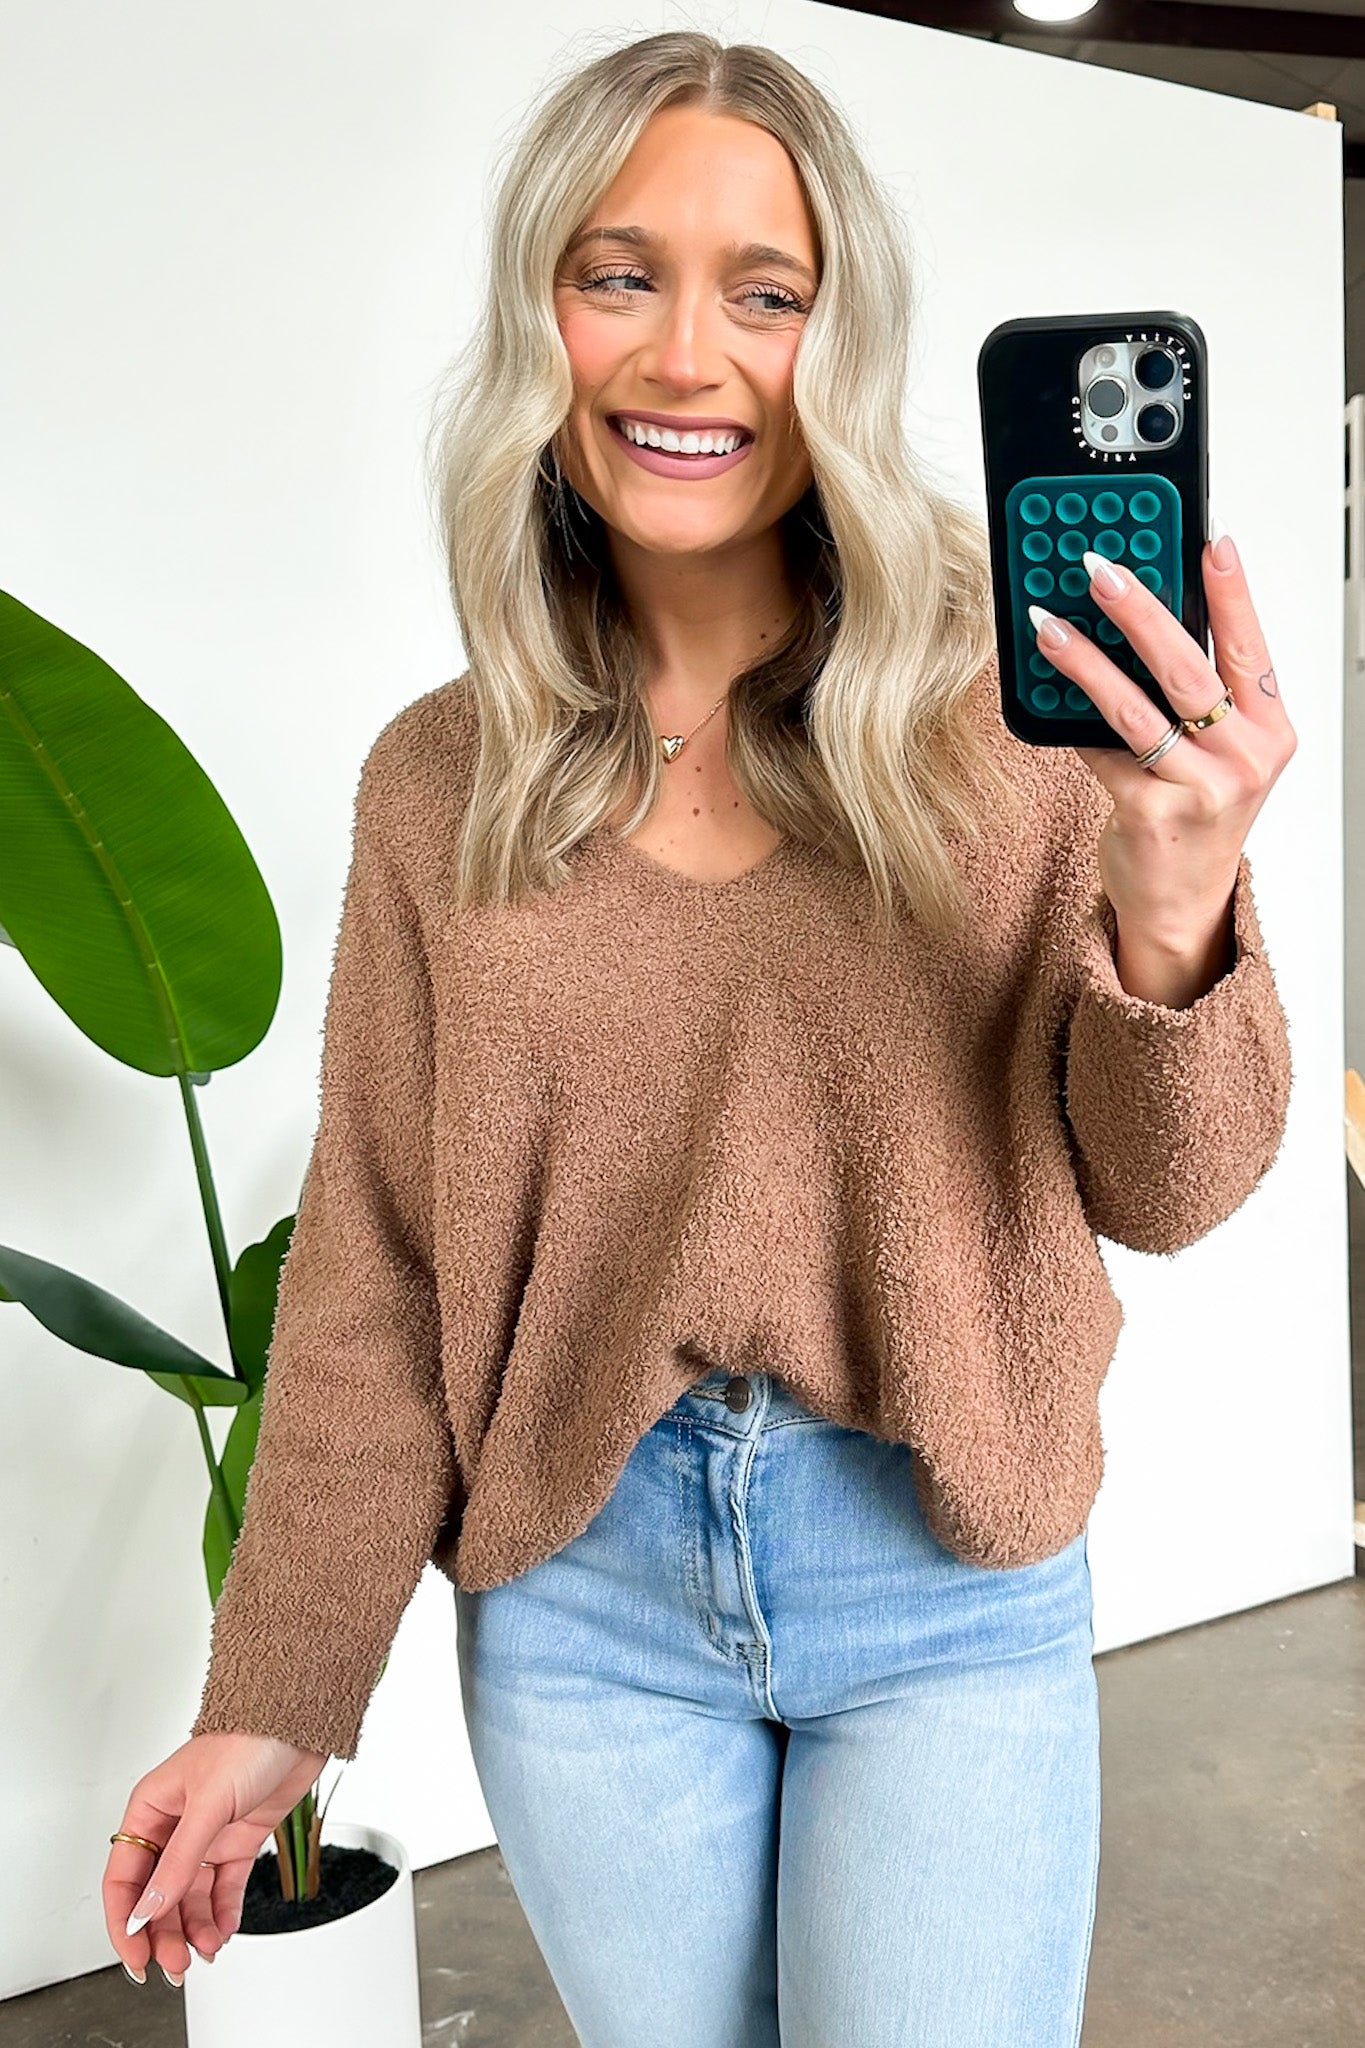  Indie V-Neck Oversized Sweater - Madison and Mallory